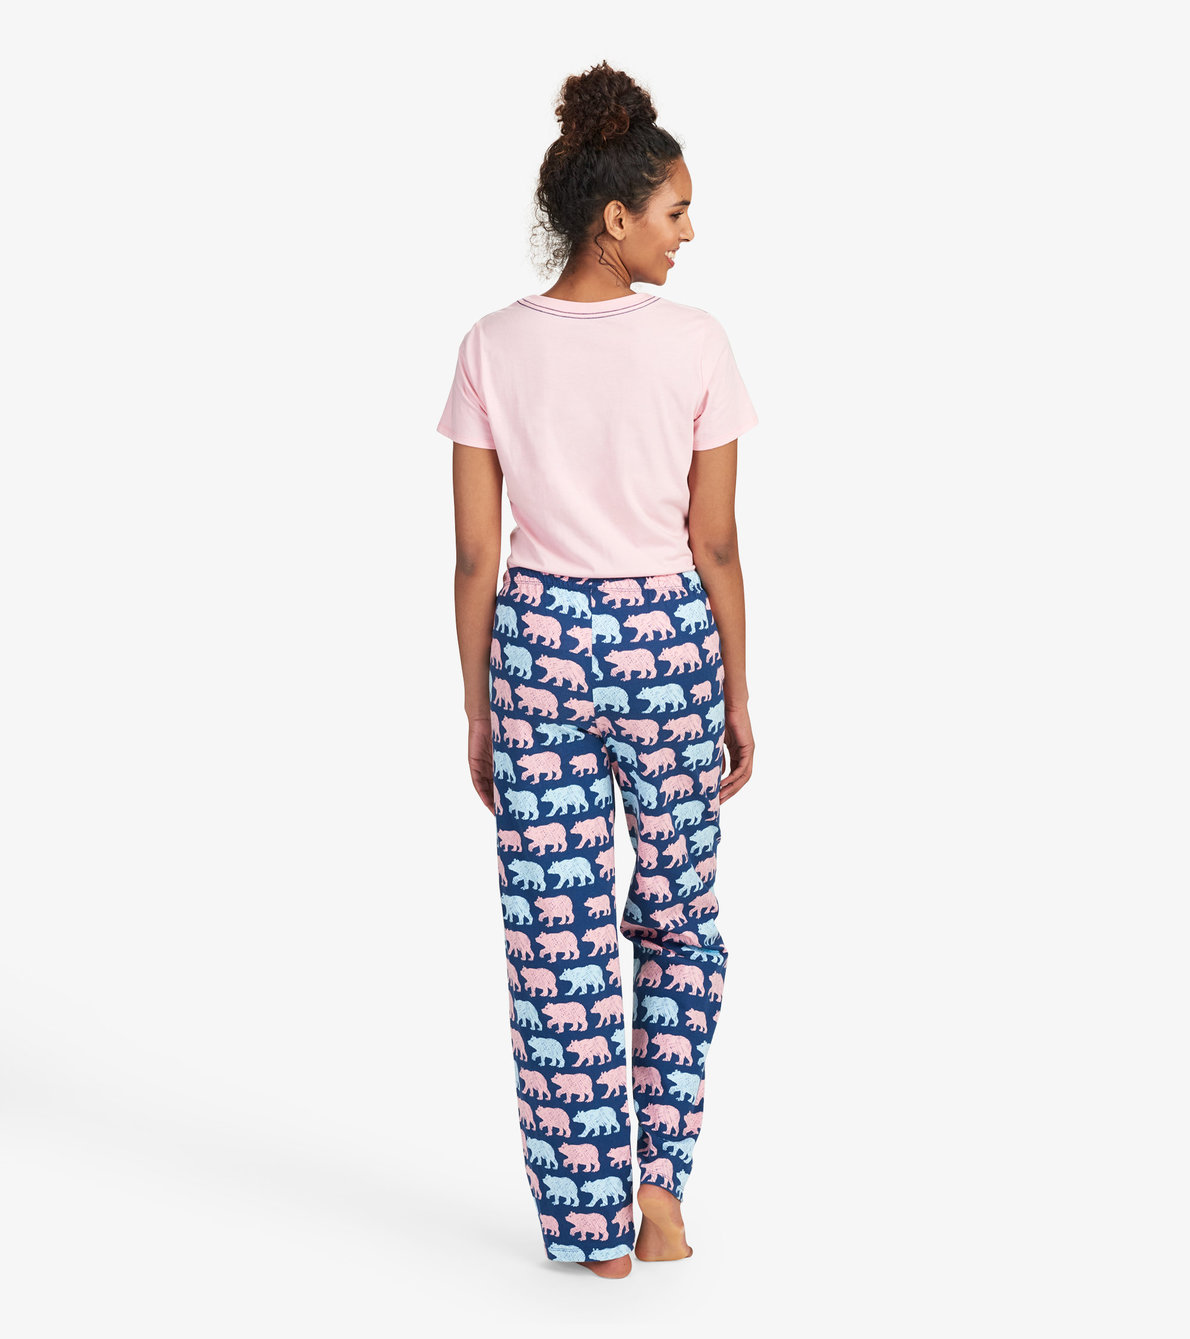 View larger image of Little Bears Women's Tee and Leggings Pajama Separates